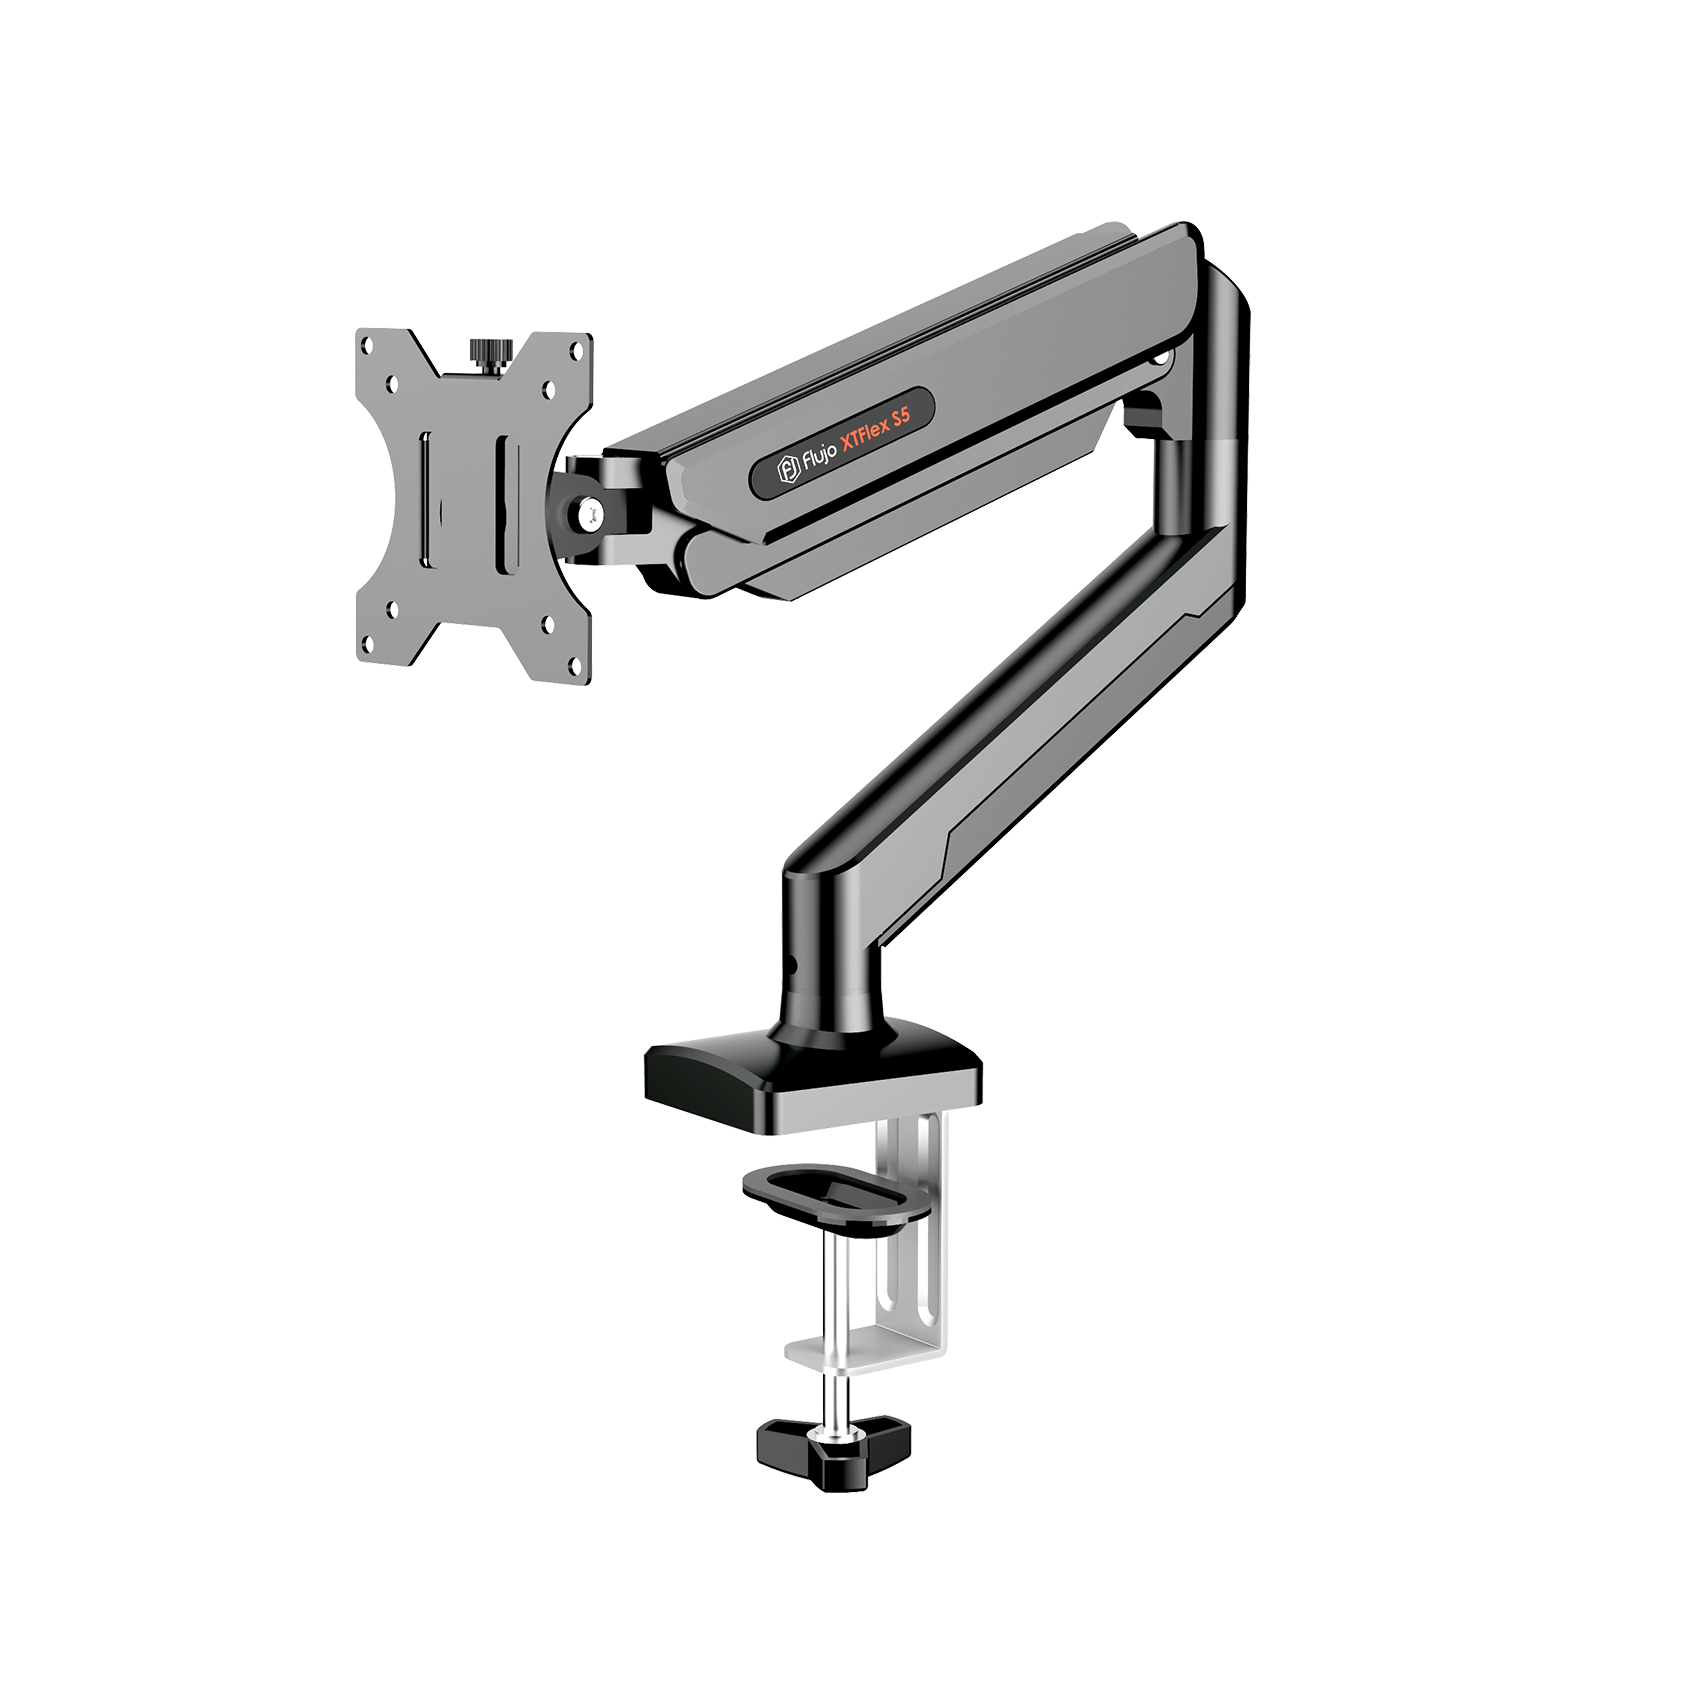 XTFlex S5 Monitor Arm in black, an adjustable and sturdy solution for ergonomic monitor positioning.